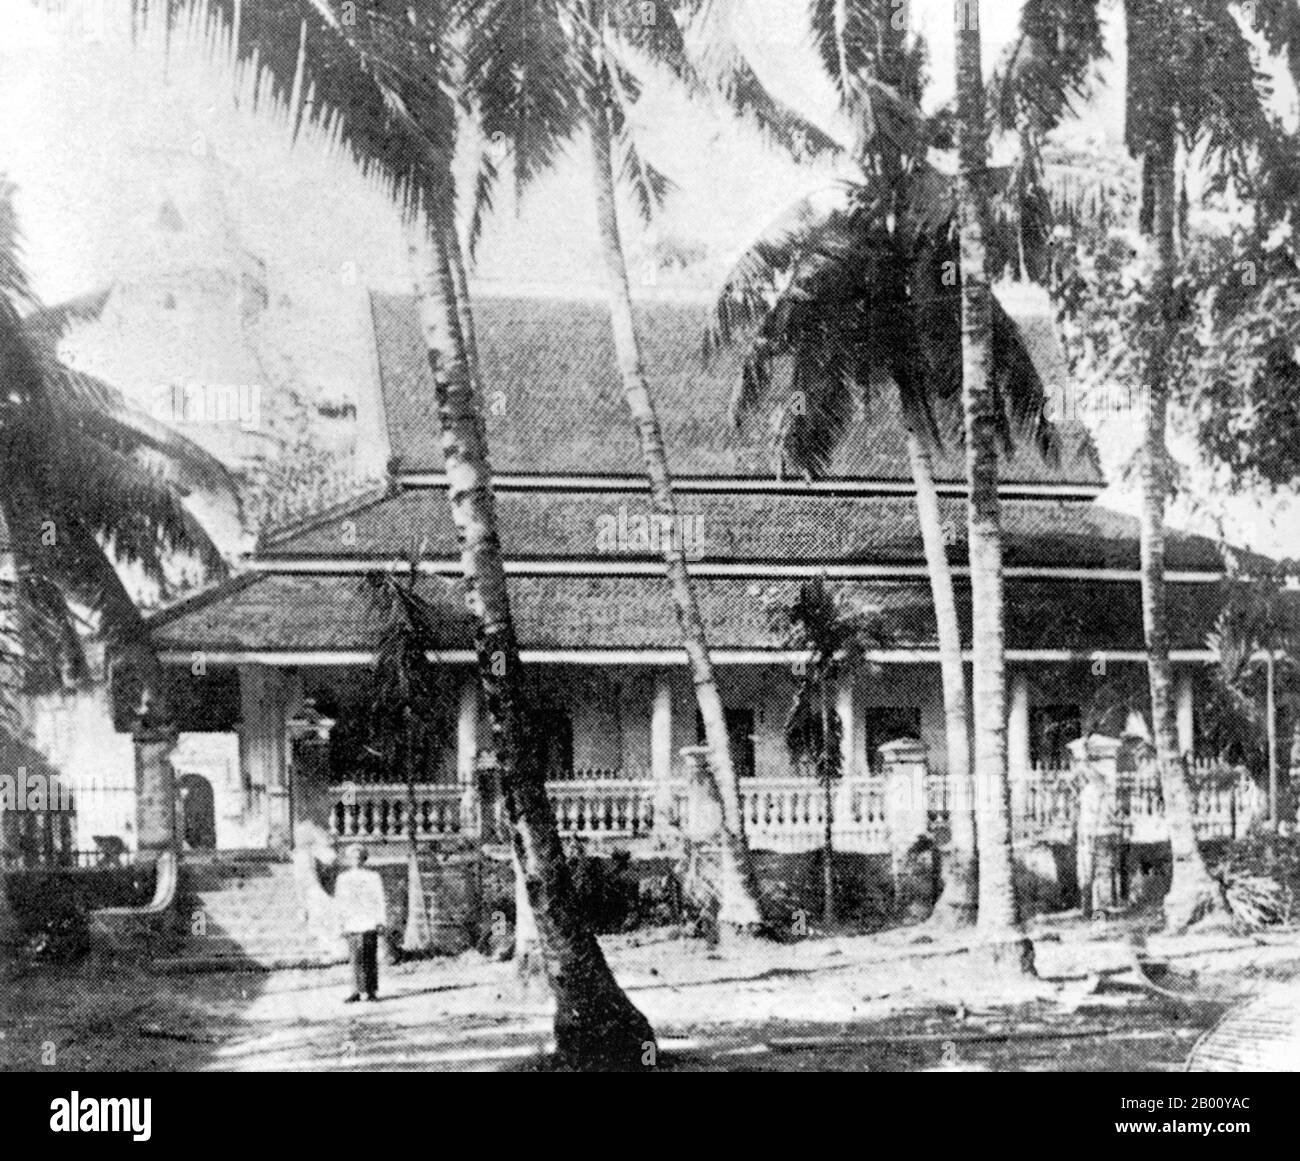 Cambodia: A 1918 photograph of the mosque of Chrang Chames, near Phnom Penh, with its minaret barely visible in the background.   In Cambodia, Islam is the religion of the majority of Cham people and some Malay minorities. In 1975, there were reportedly 150,000 to 200,000 Muslims nationwide. However, persecution under the Khmer Rouge severely eroded their numbers. In 2009, the Pew Research Center estimated the Muslim population of Cambodia at 236,000. All of the Cham Muslims are Sunnis of the Shafi'i school. There is also a growing Ahmadiyya  Muslim community in the country. Stock Photo